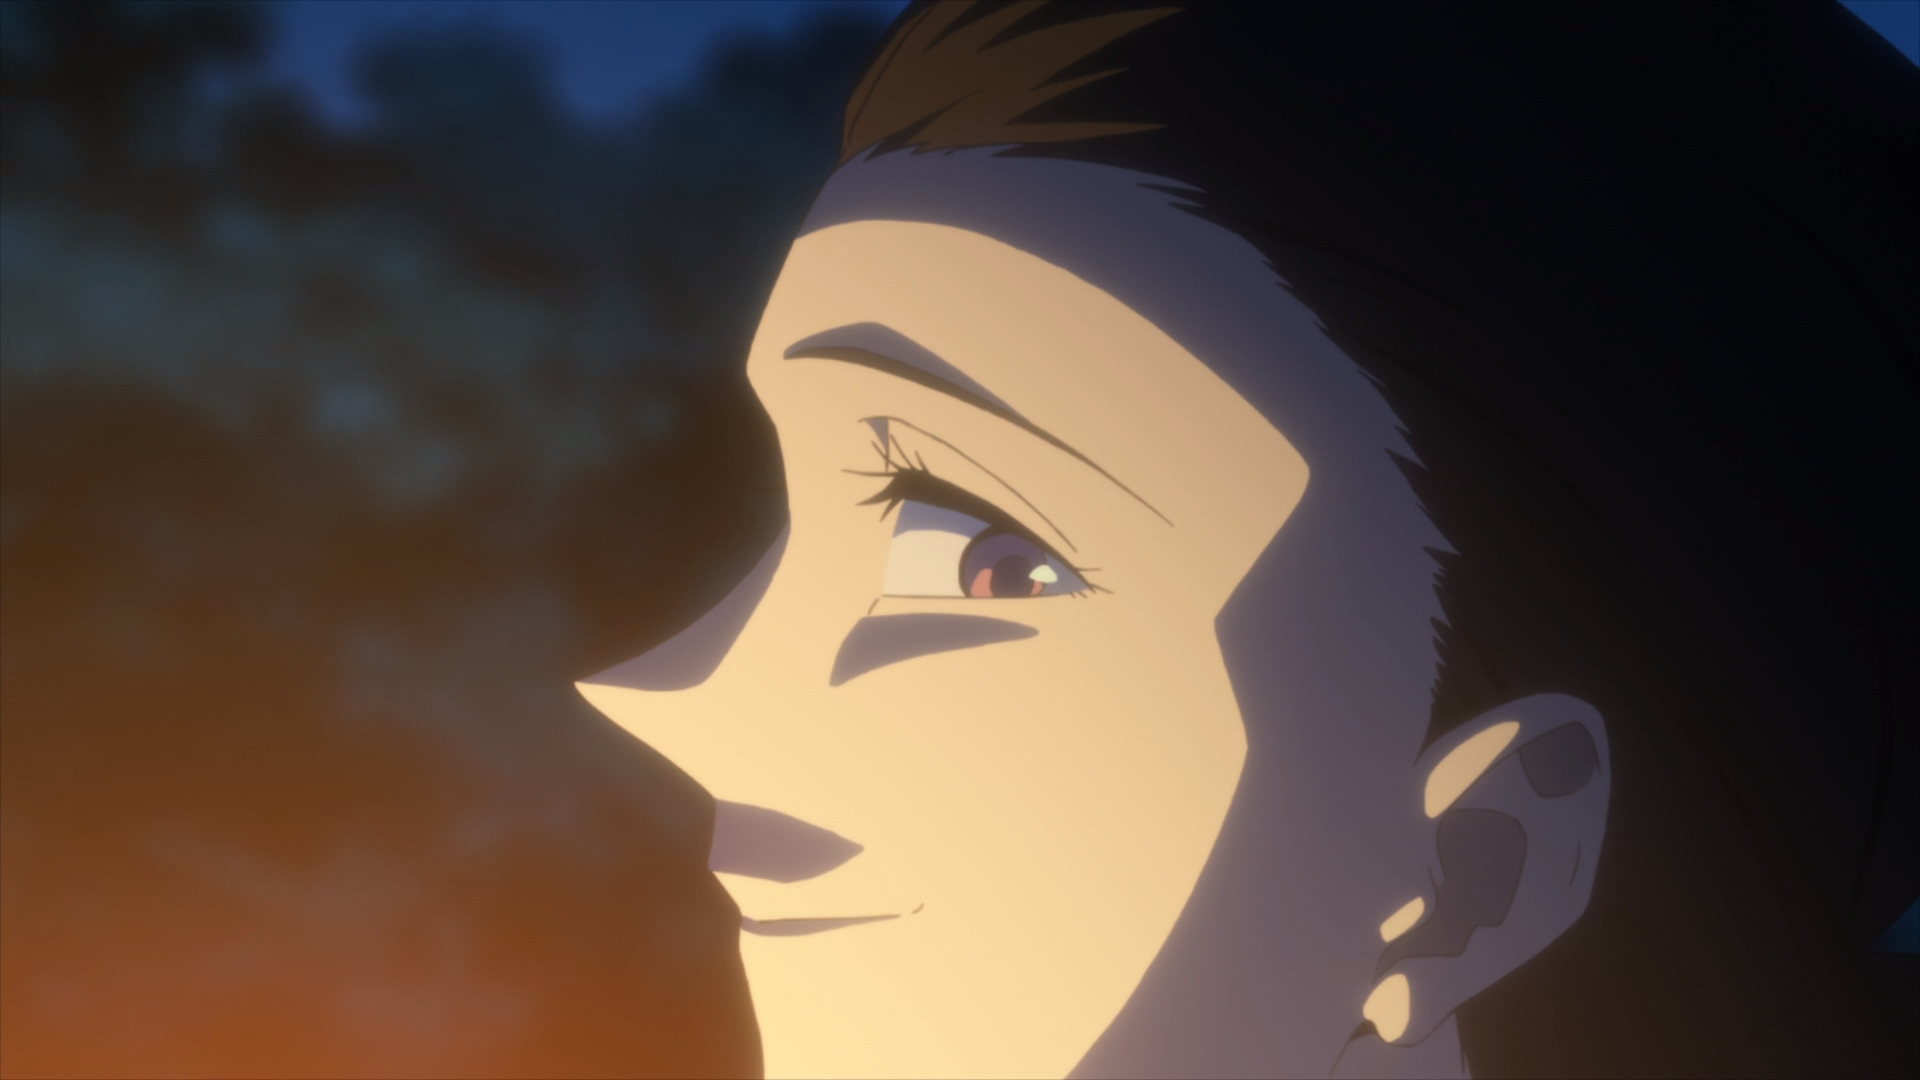 Isabella hums her lullaby while leading Connie to her death in episode 1 of The Promised Neverland.